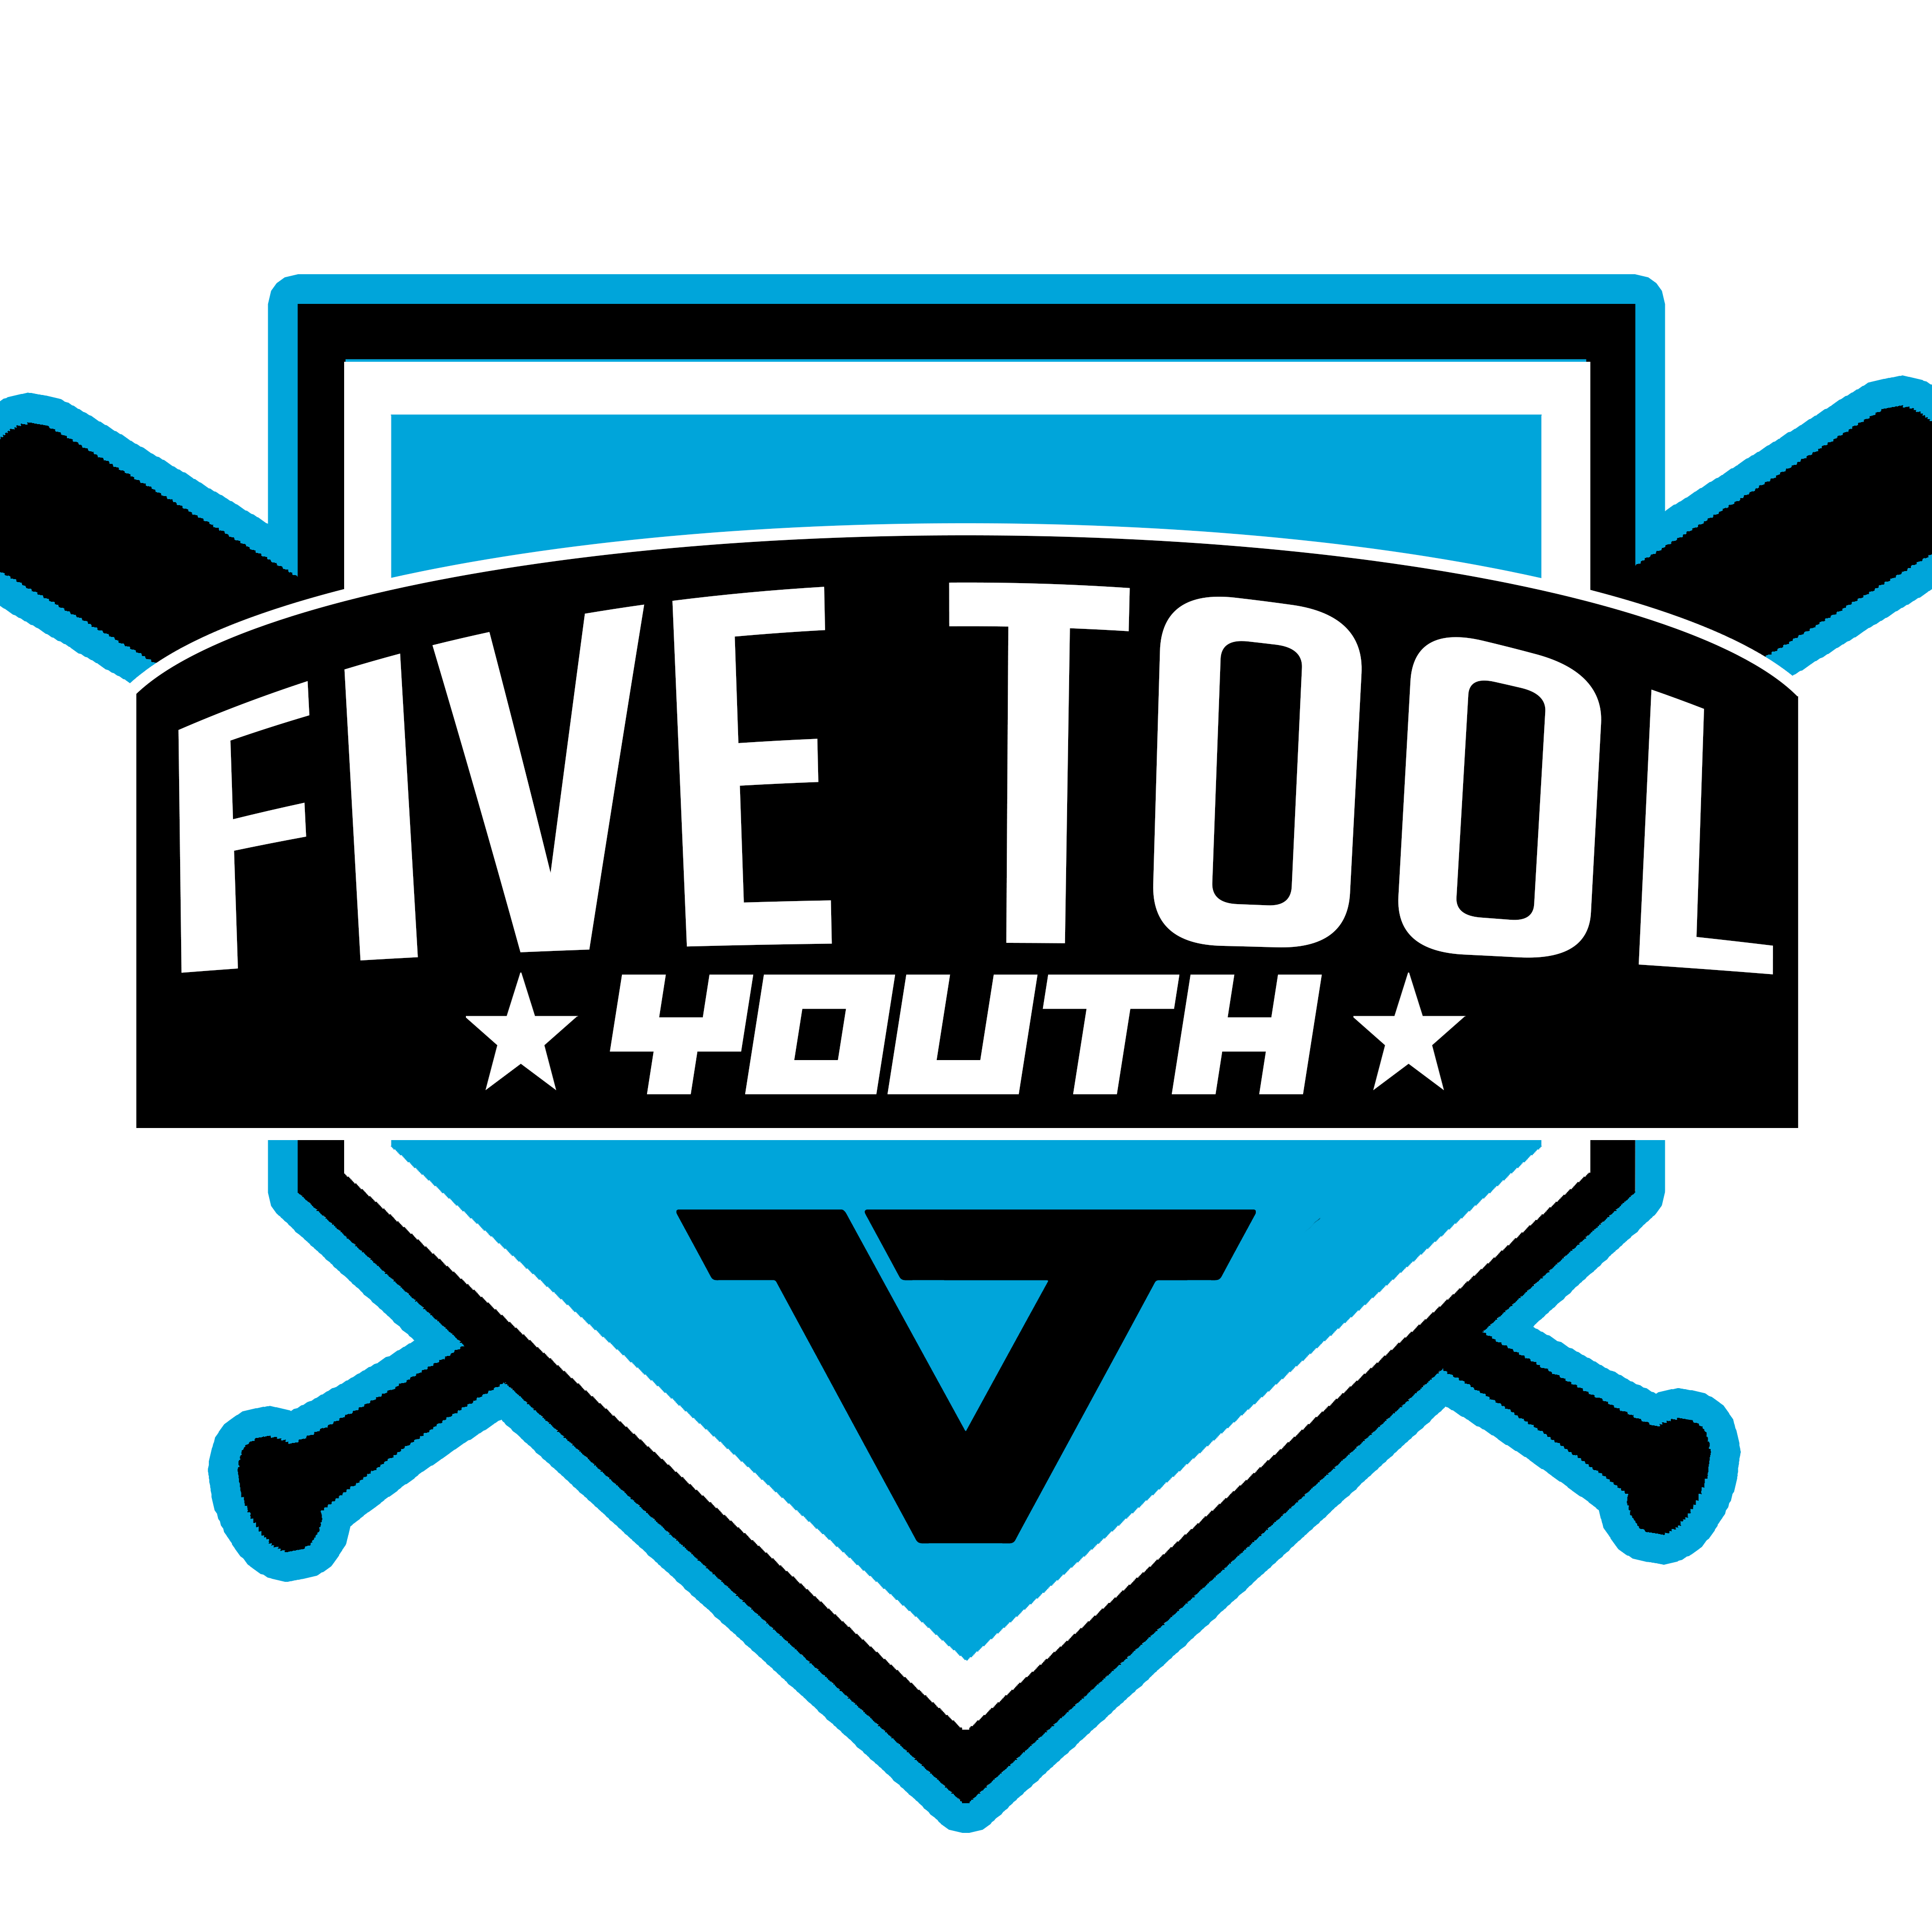 Five Tool Youth - April Texas 20